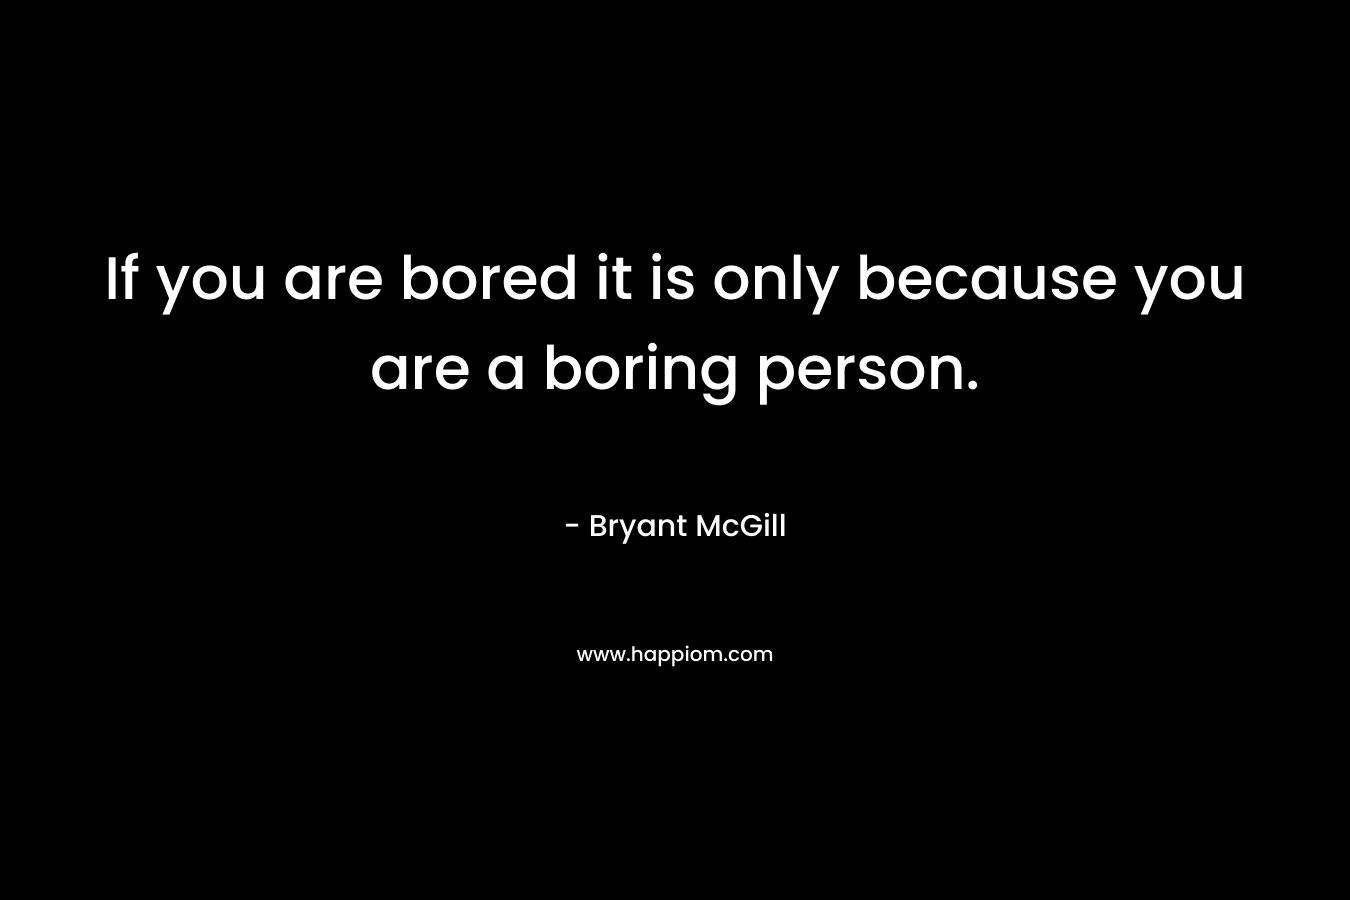 If you are bored it is only because you are a boring person.